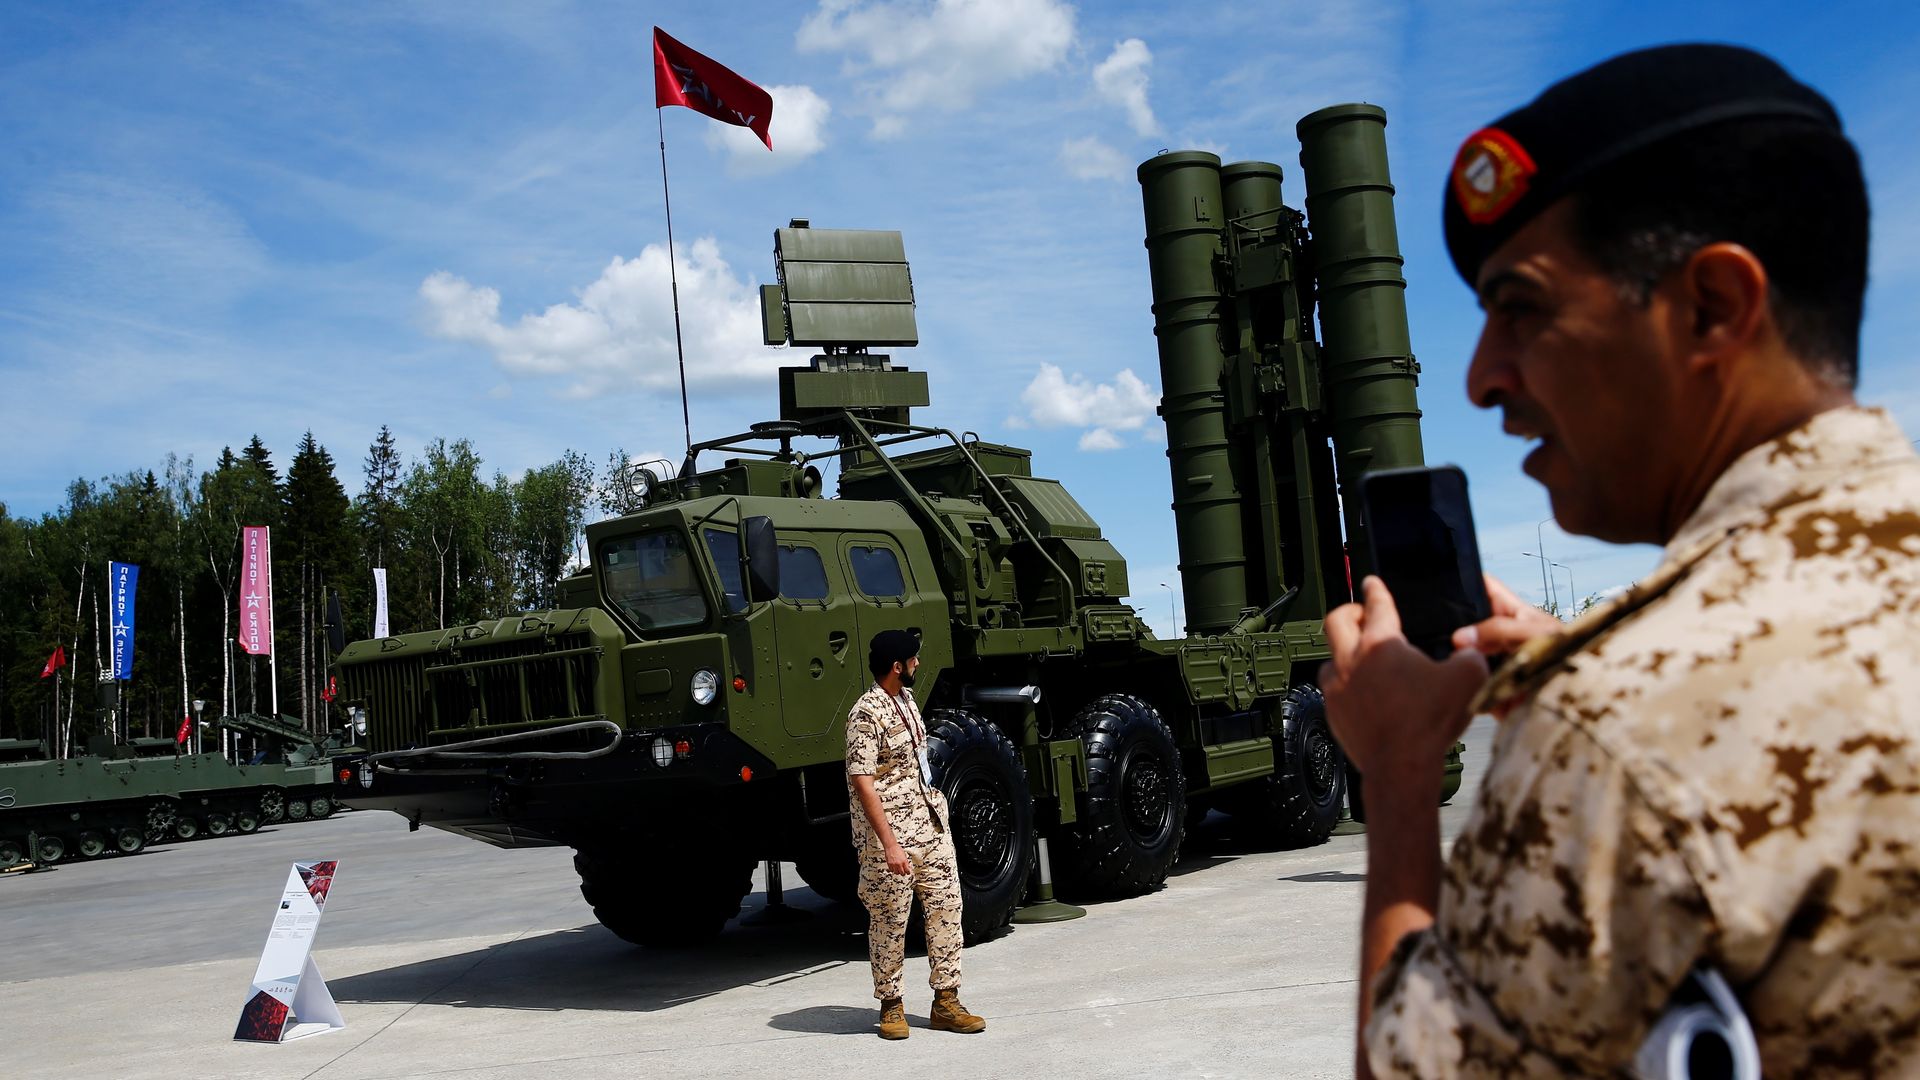 A S-400 surface-to-air missile launcher